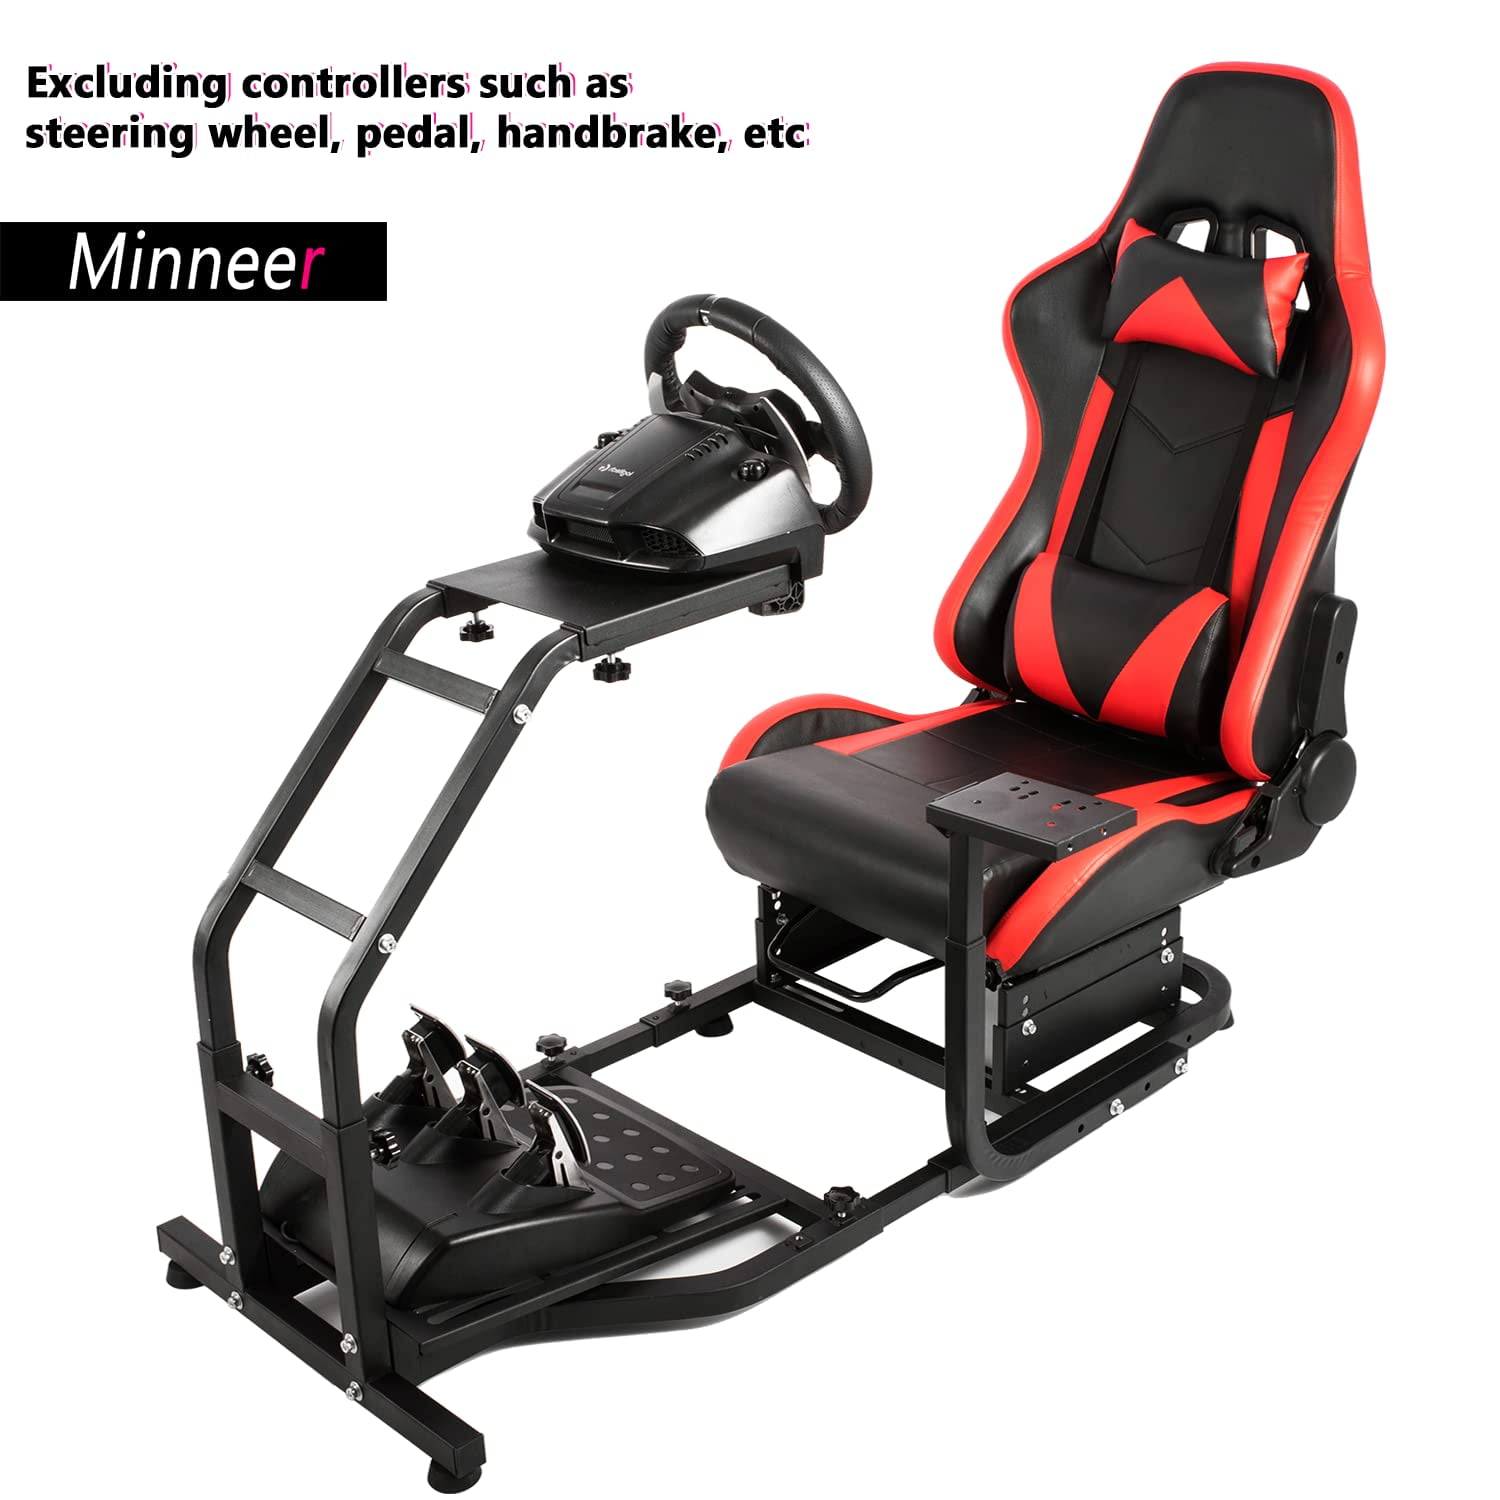 Minneer Racing Simulator Cockpit with Seat Fit for G29 G27 G25 G923 Steering Wheel Stand - Walmart.com